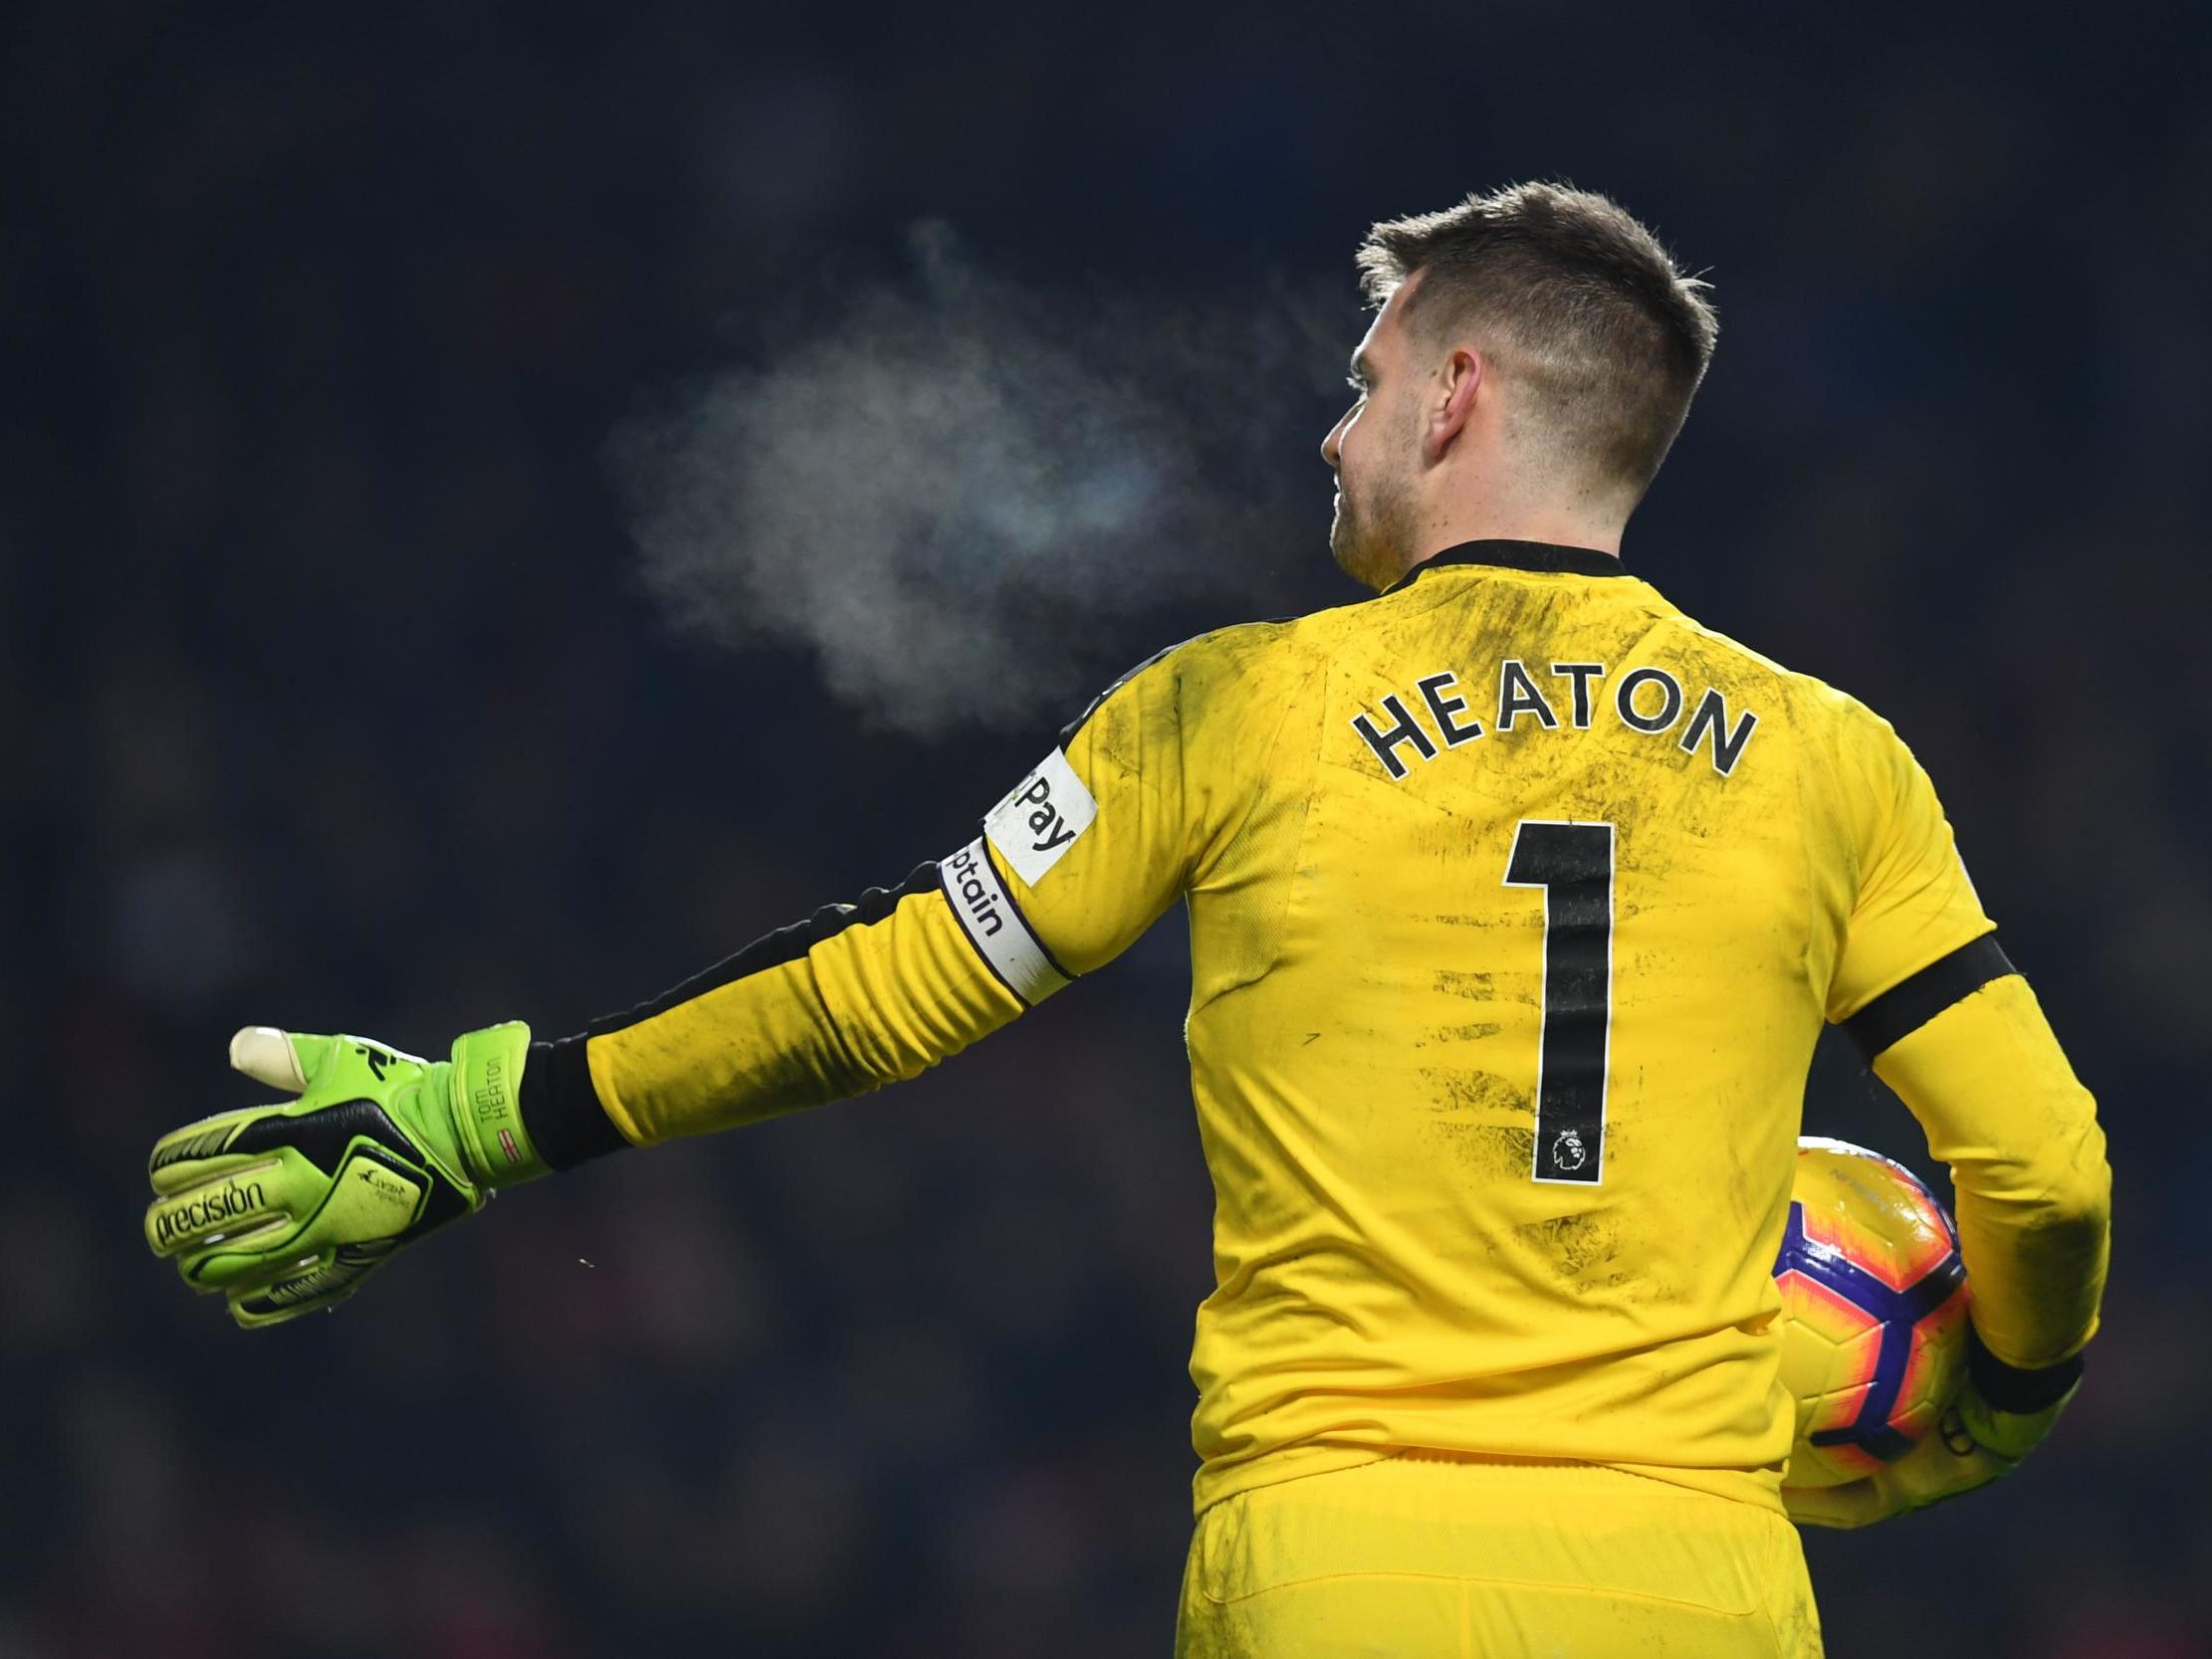 Heaton put in a good showing against United